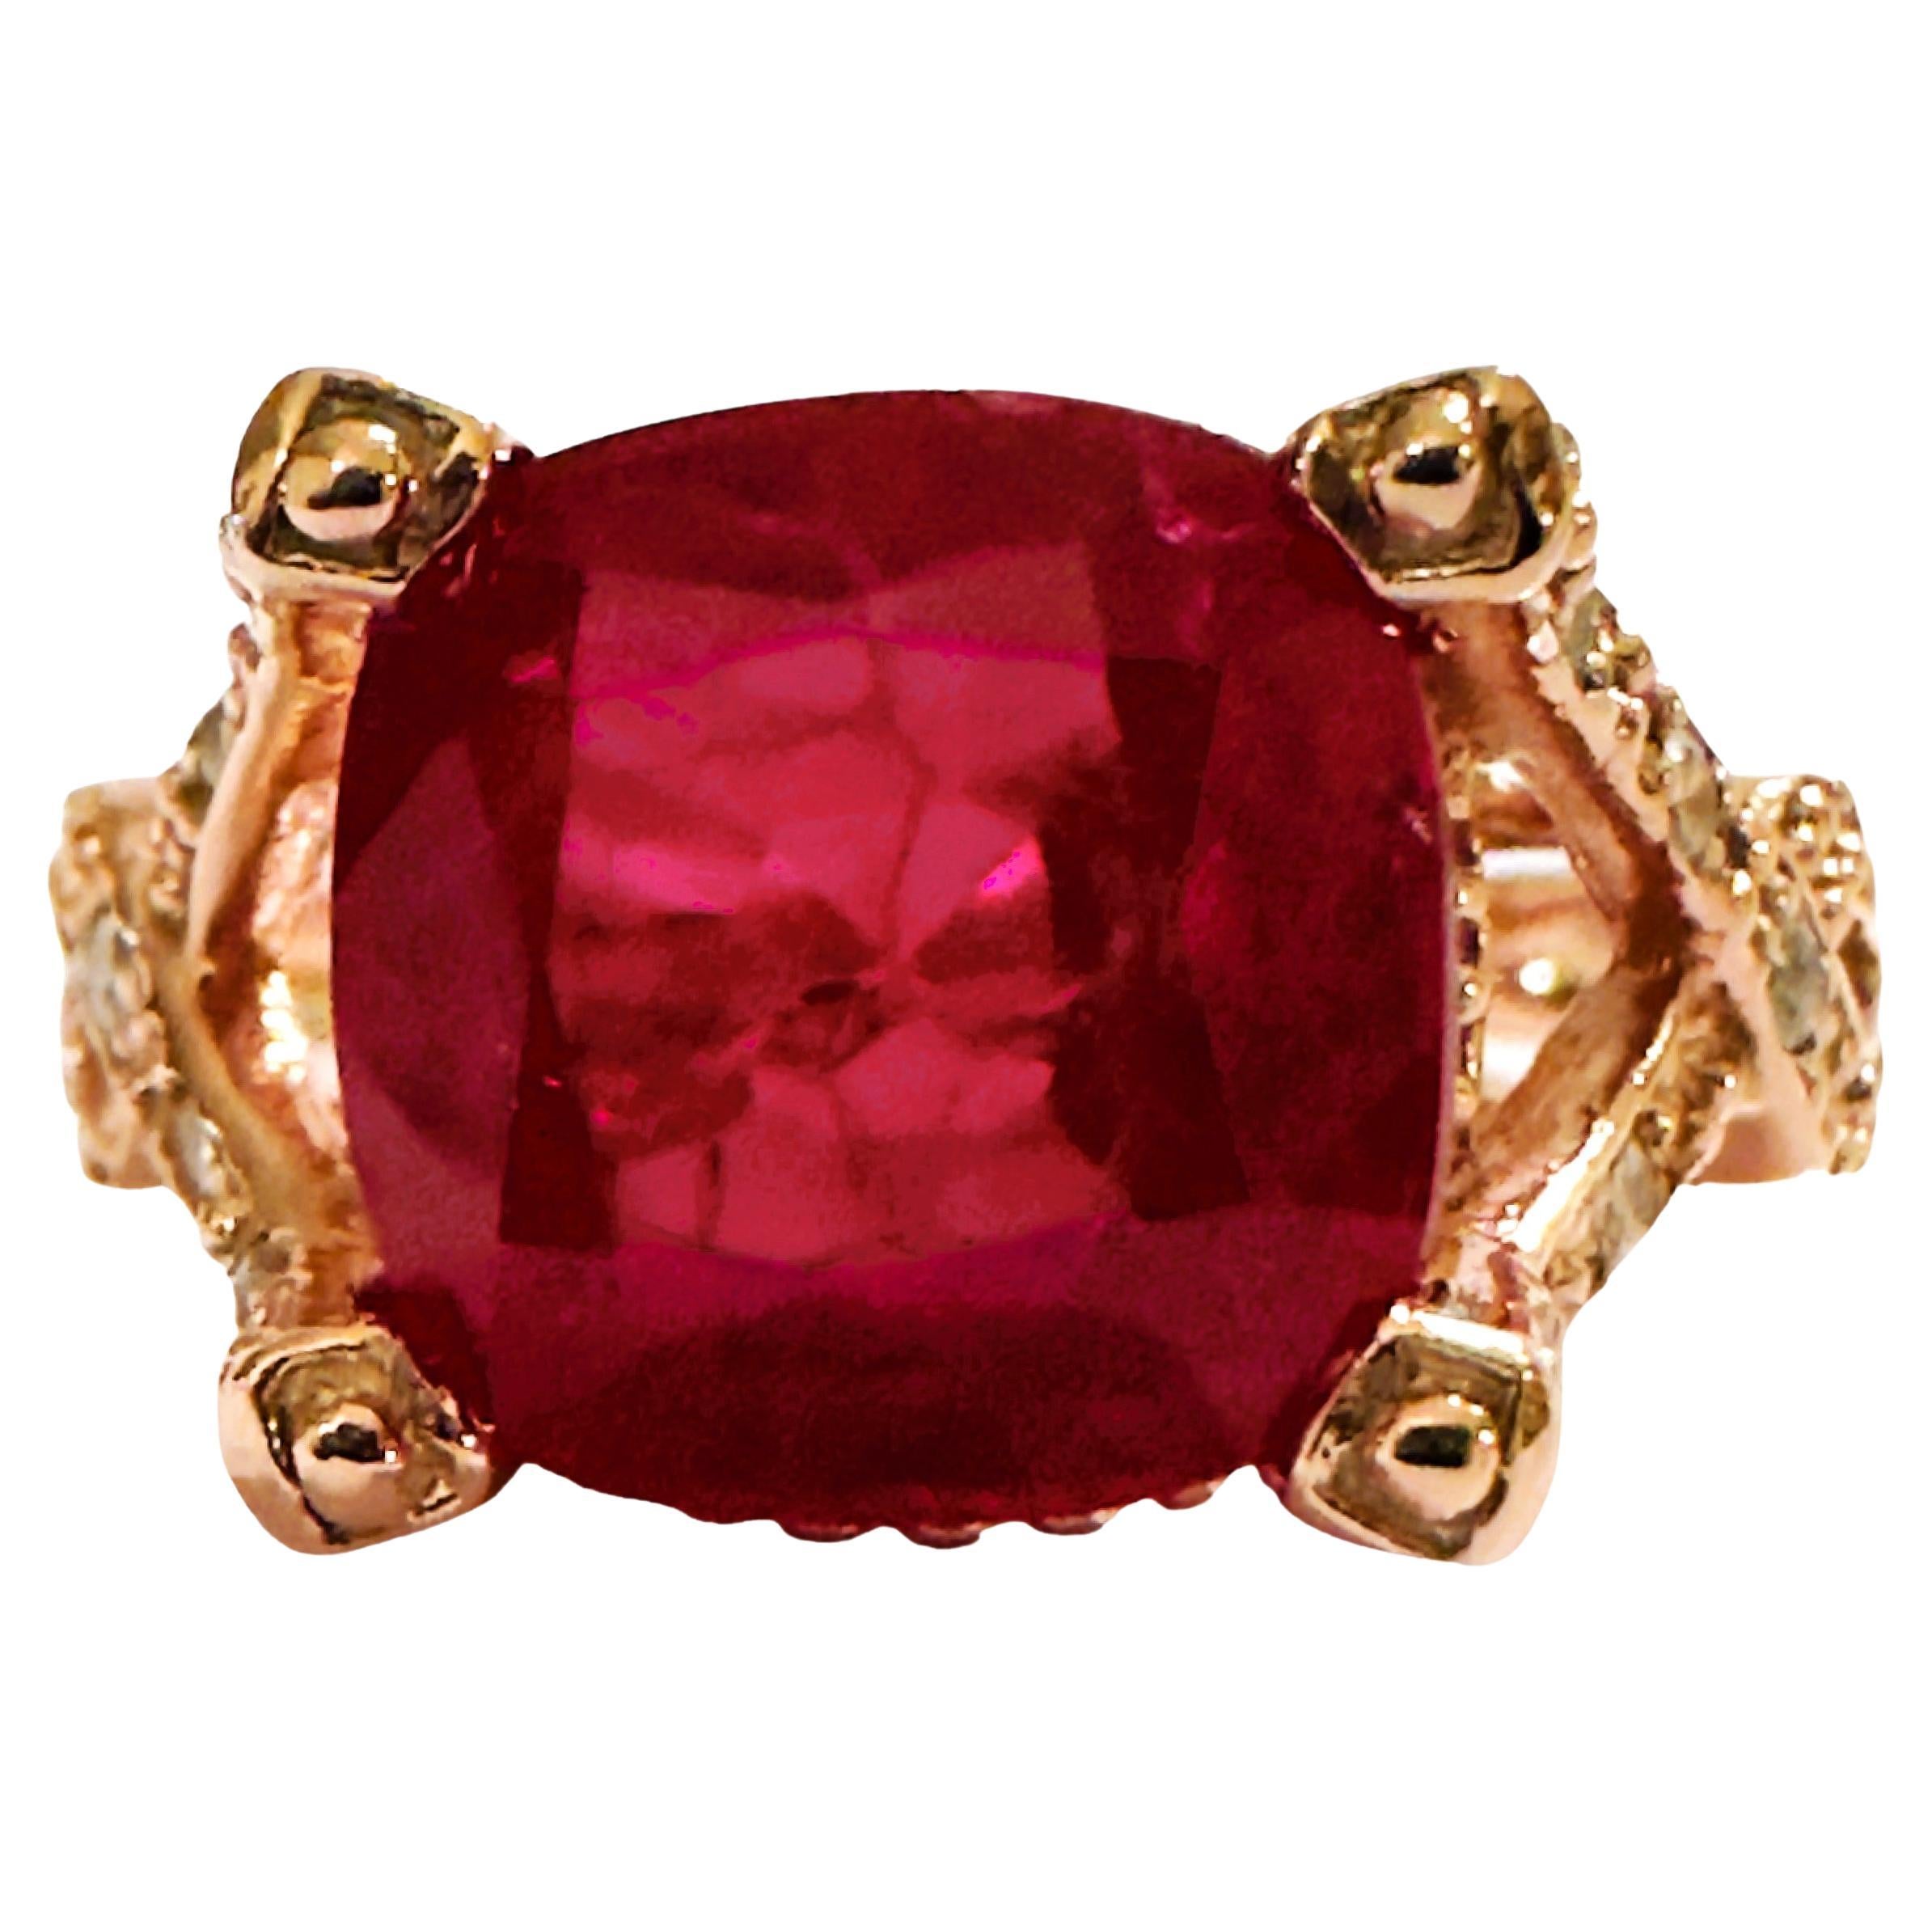 New African 5.4 Ct Pinkish Red Sapphire RGold Plated Sterling Ring 